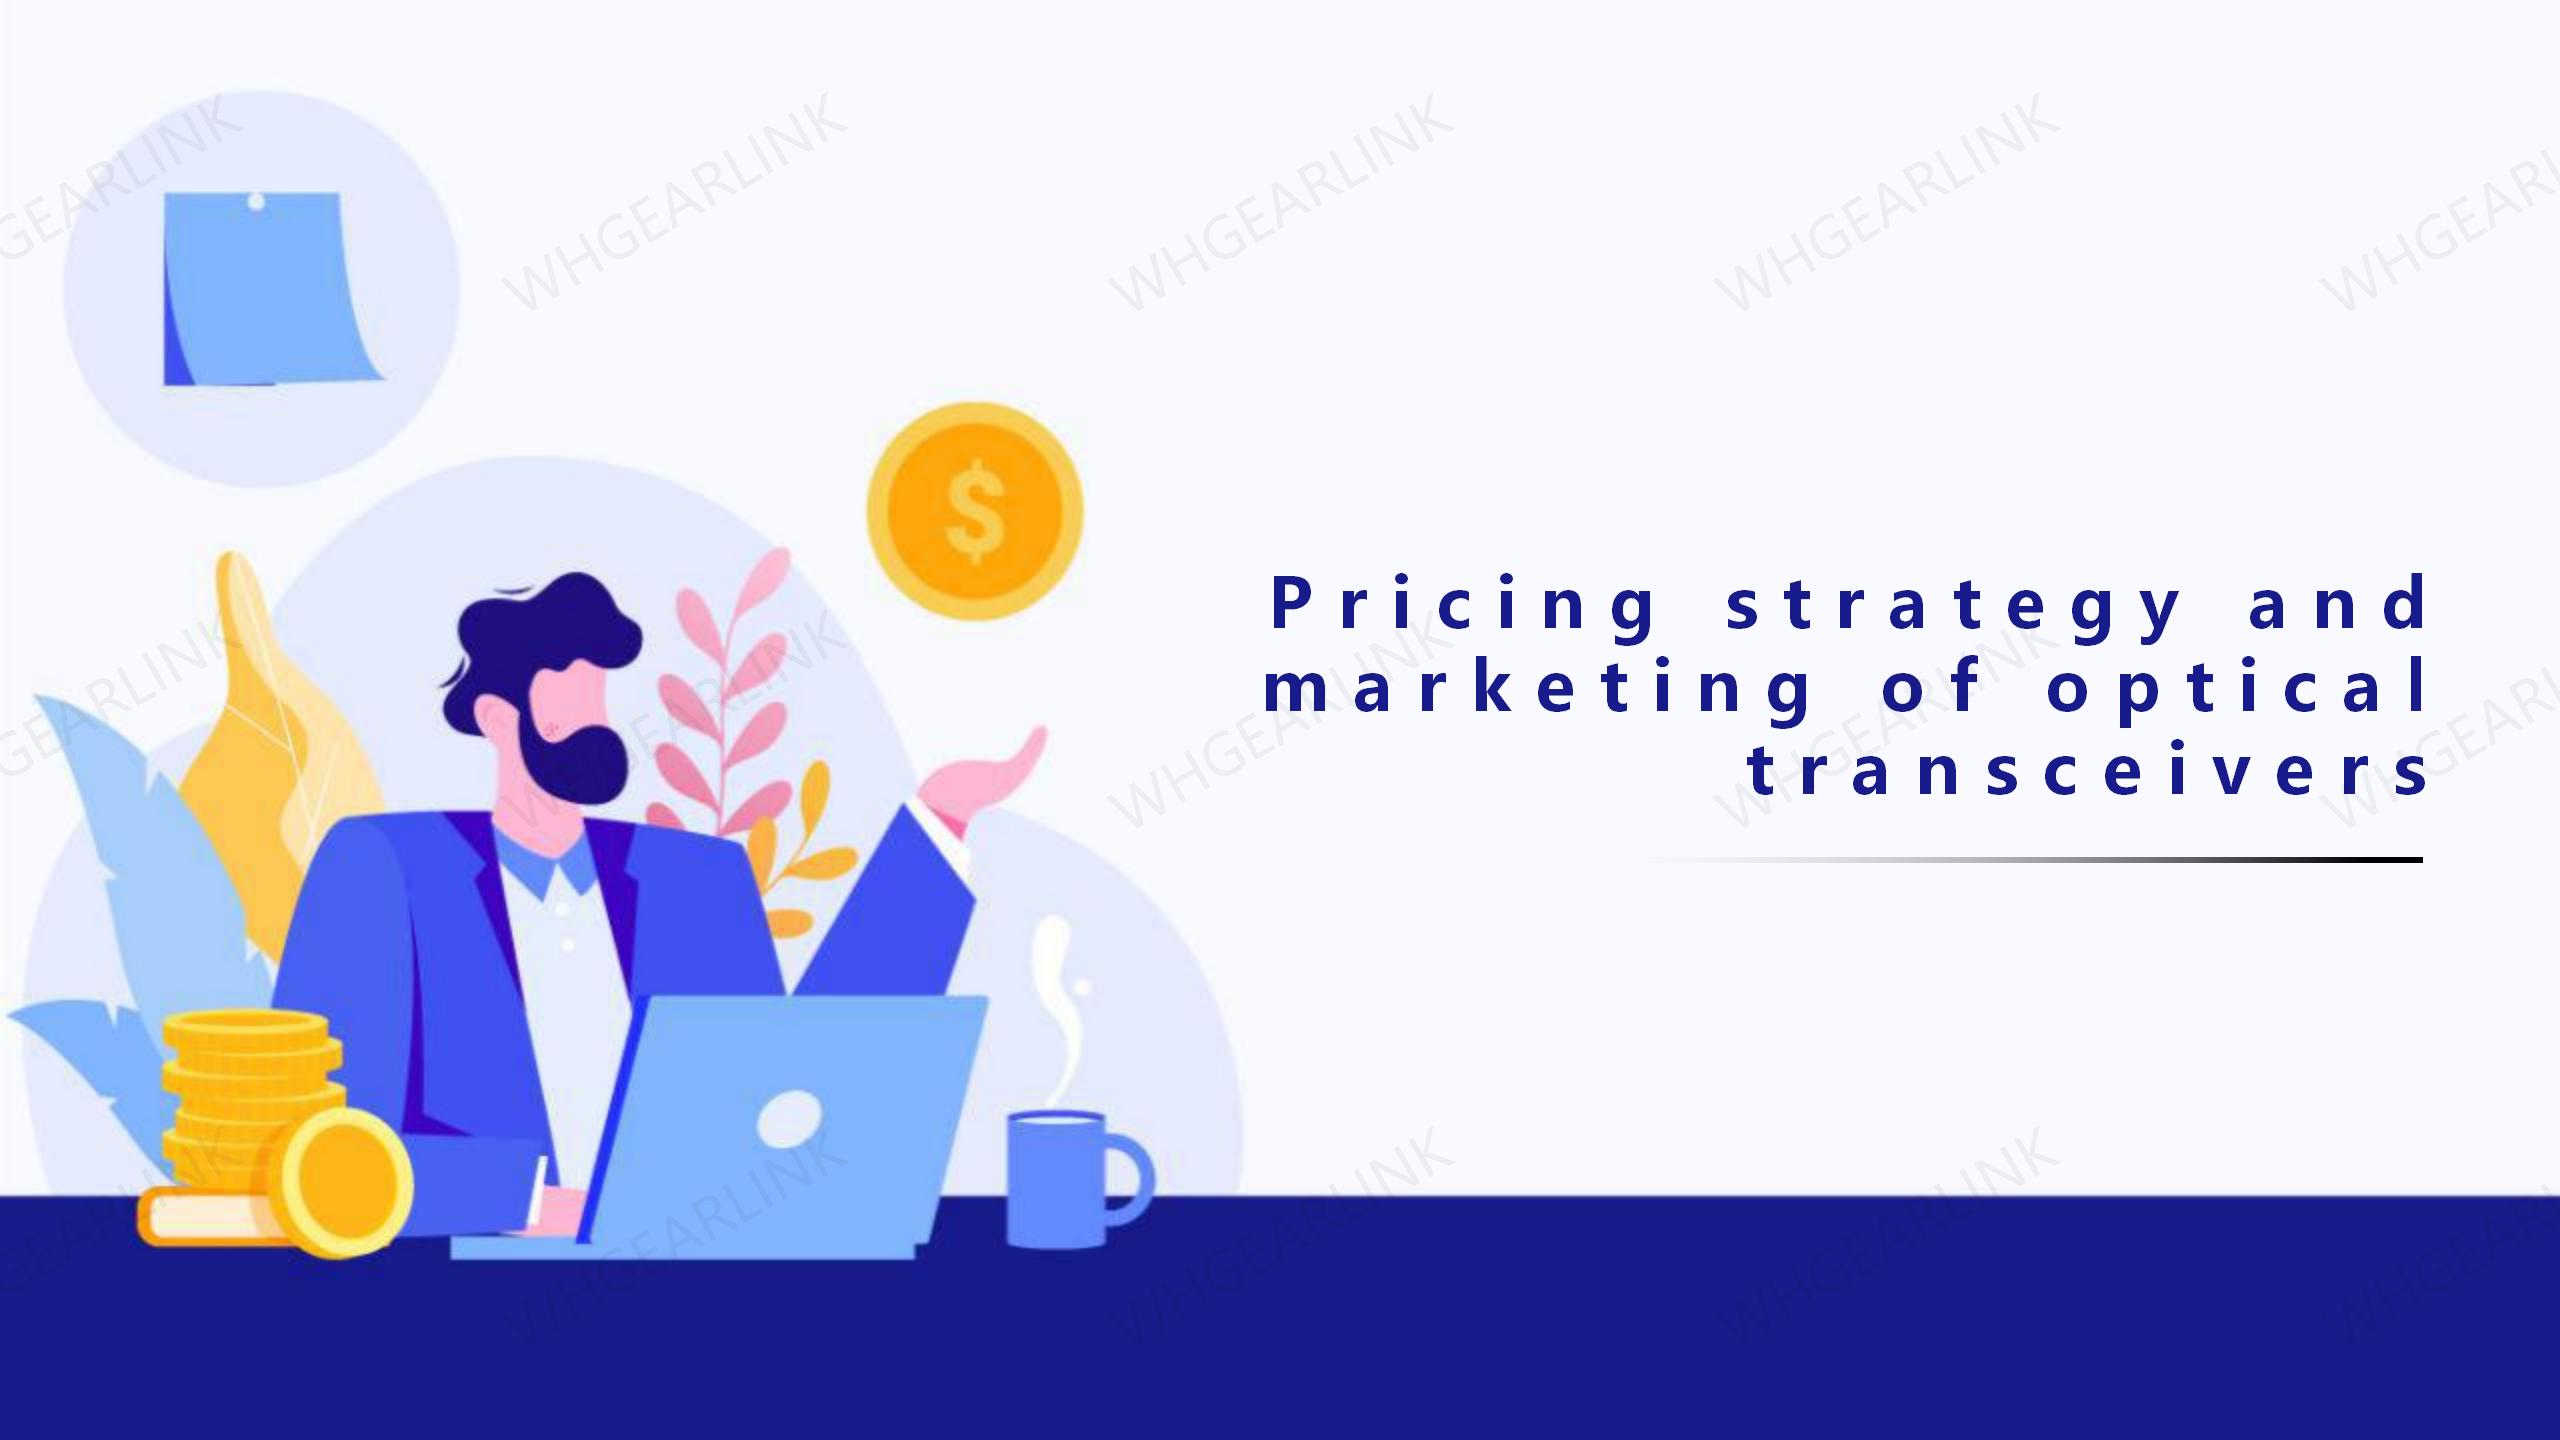 Pricing strategy and marketing of optical transceivers